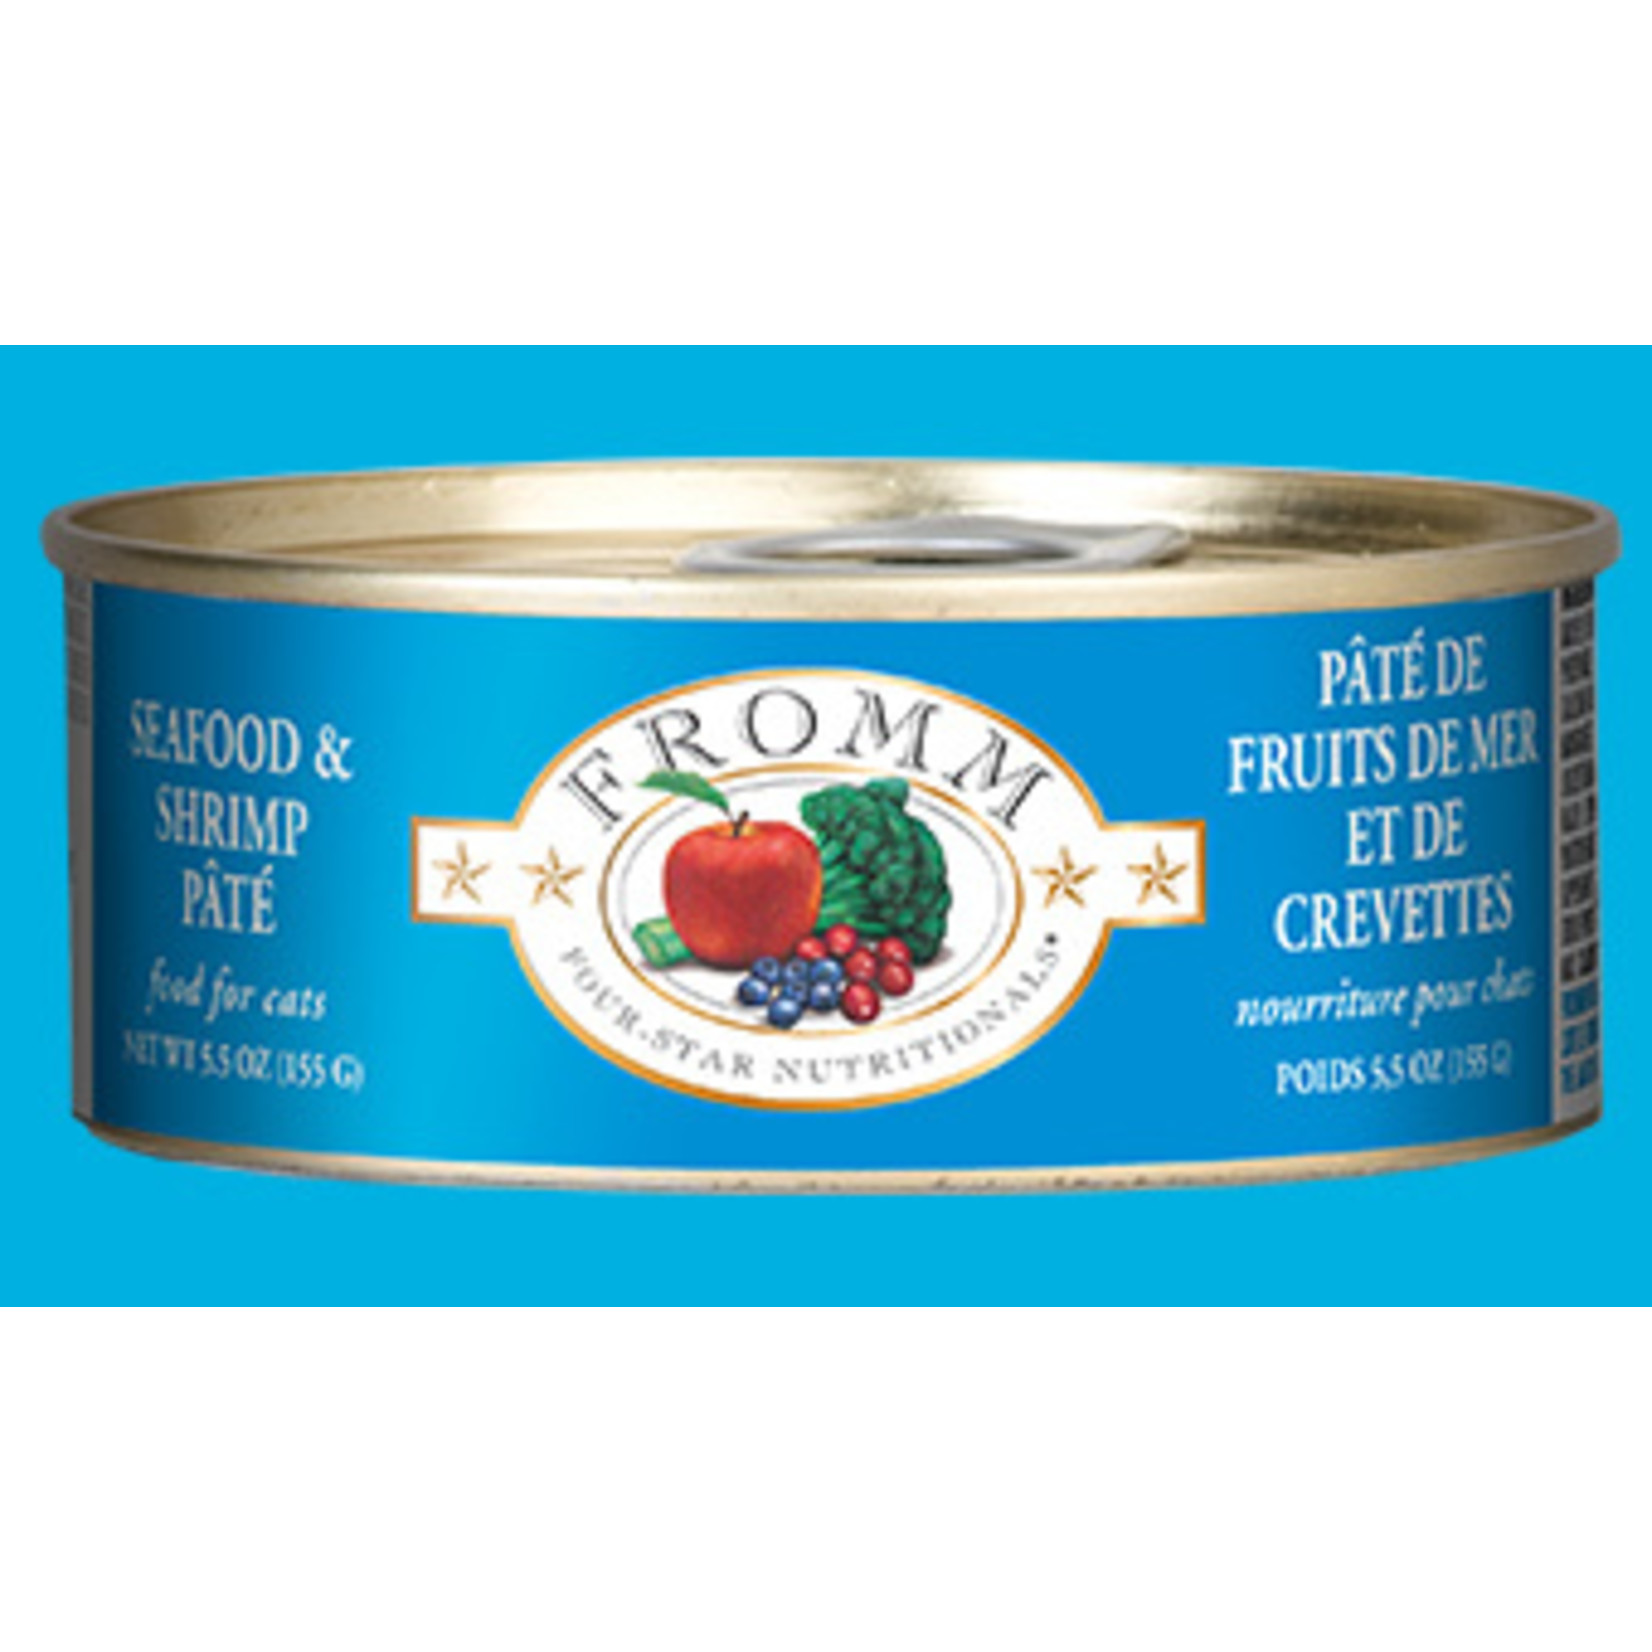 Fromm Fromm Wet Cat Food Four Star Nutritionals Seafood & Shrimp Pate 5.5oz Can